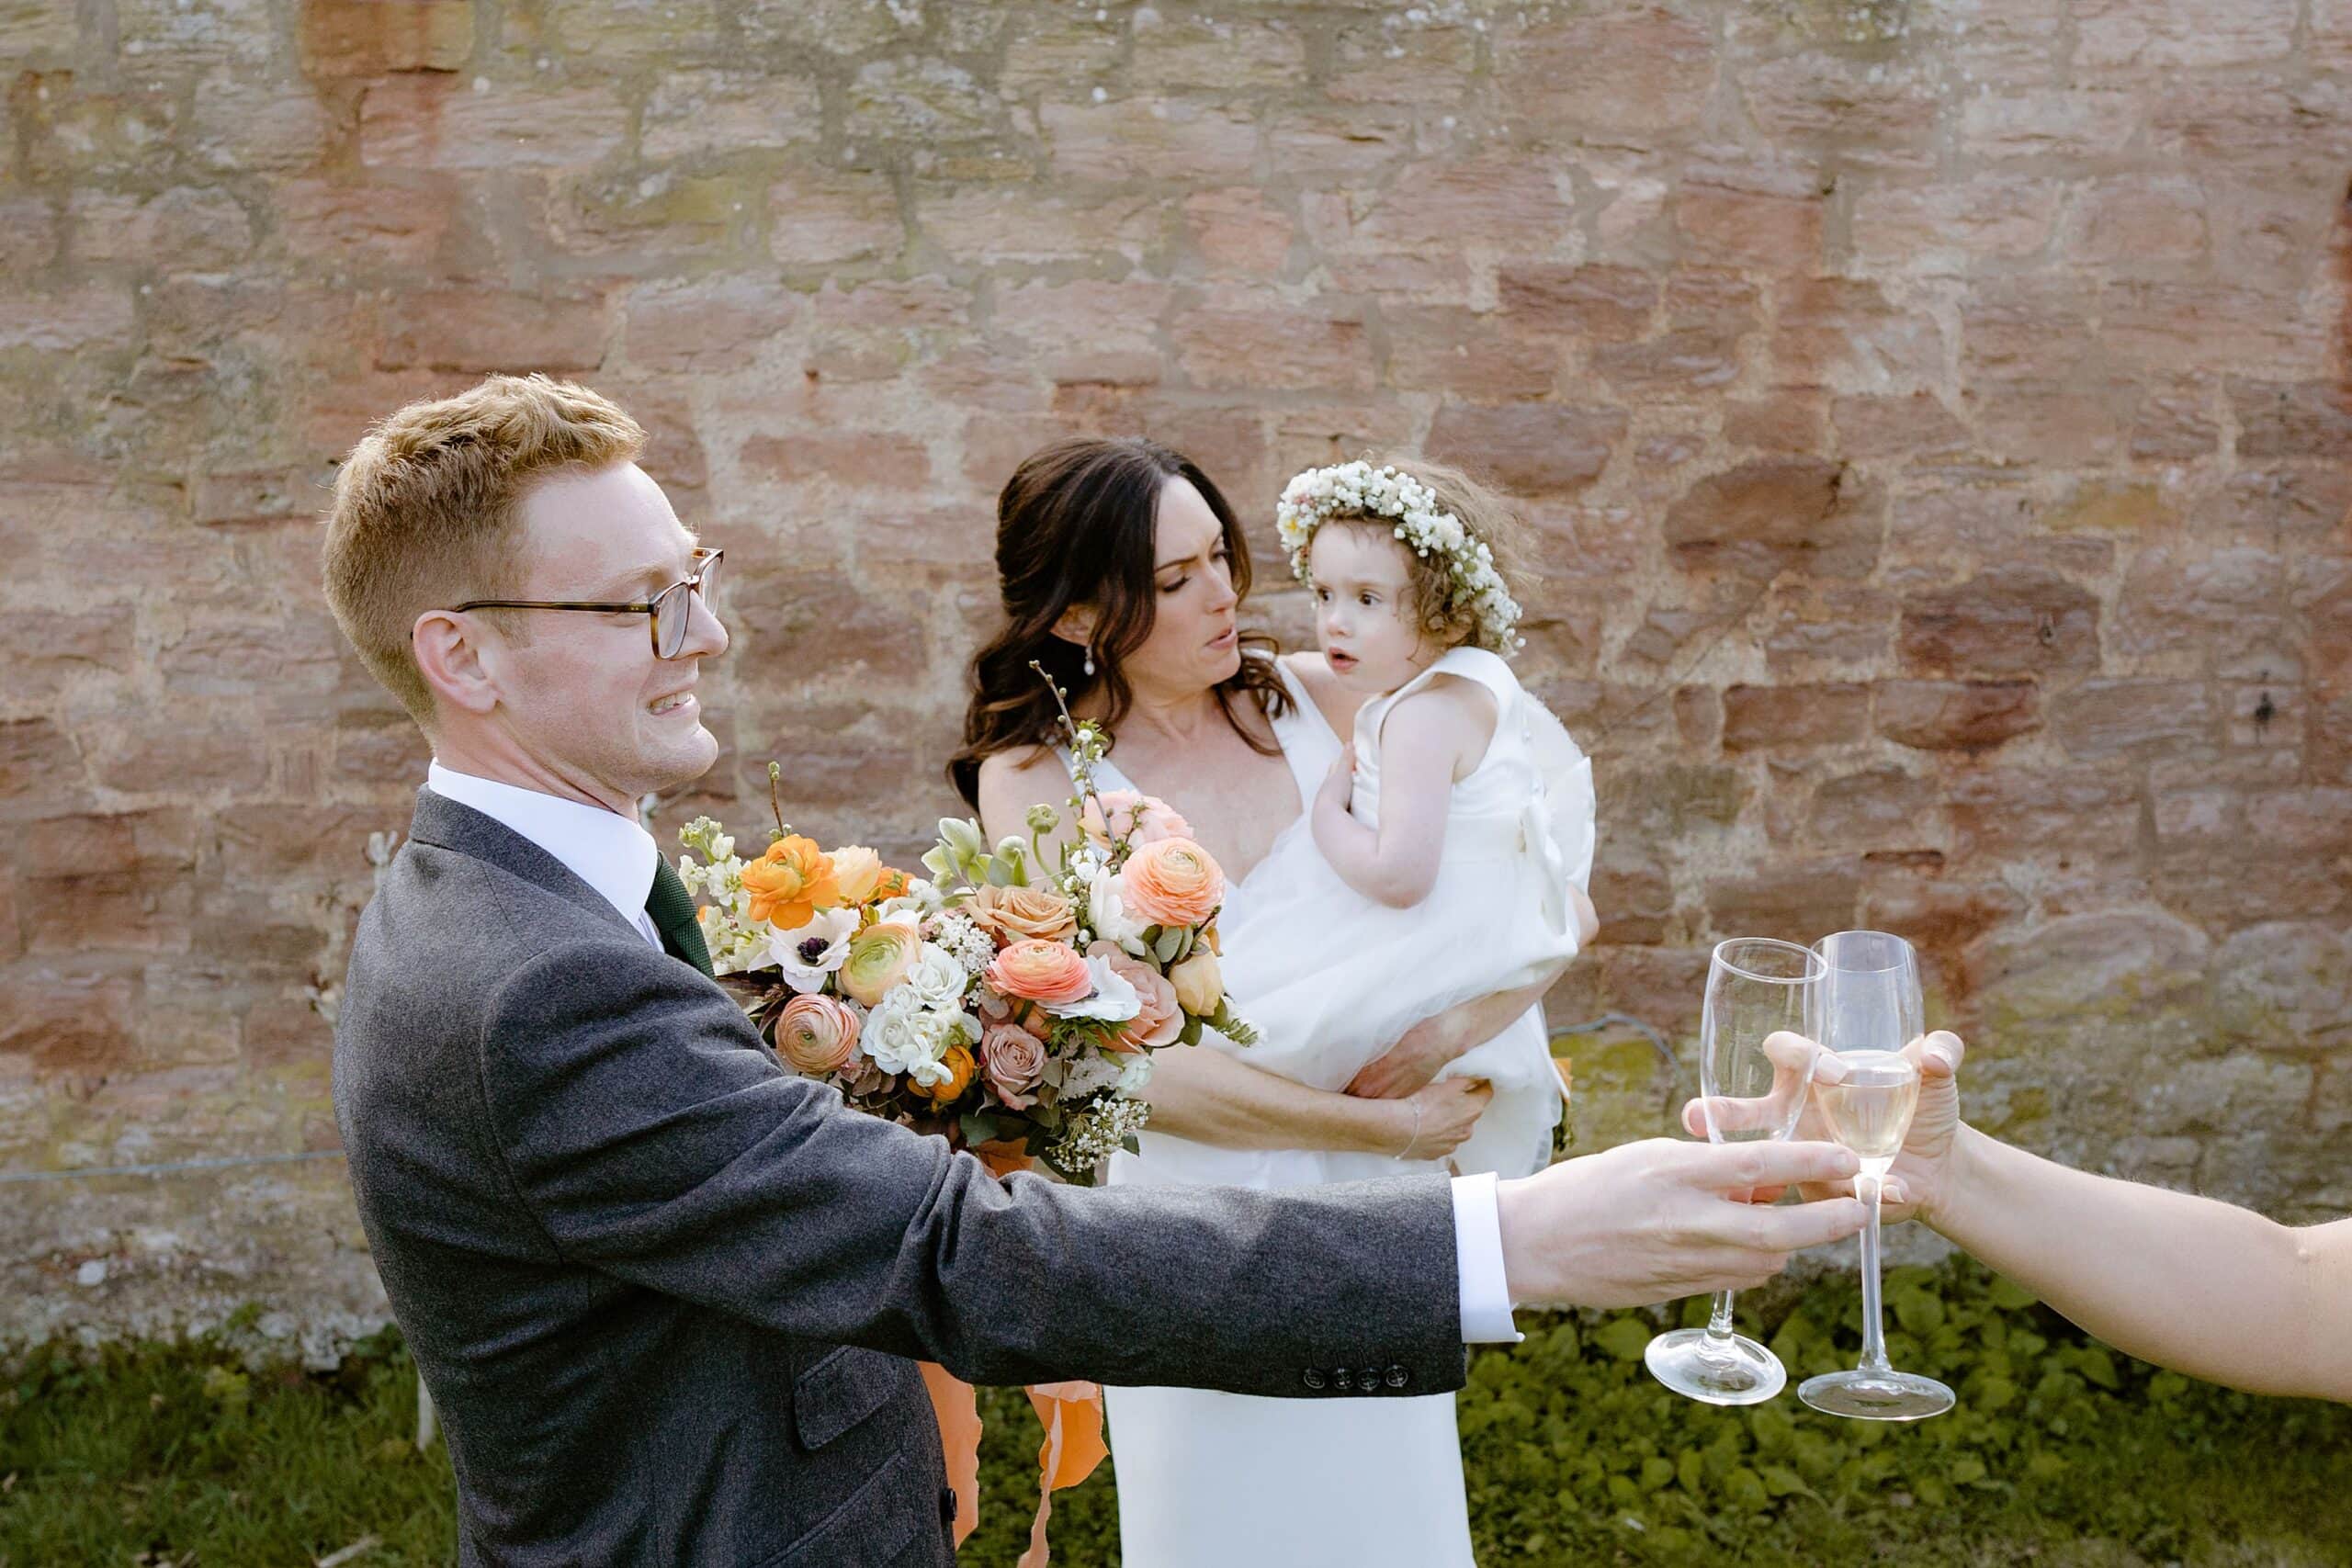 documentary shot of the bride holding her toddler daughter as the groom gives away a champagne glass as they stand in front of a stone wall at their outdoor wedding venue near edinburgh in scotland